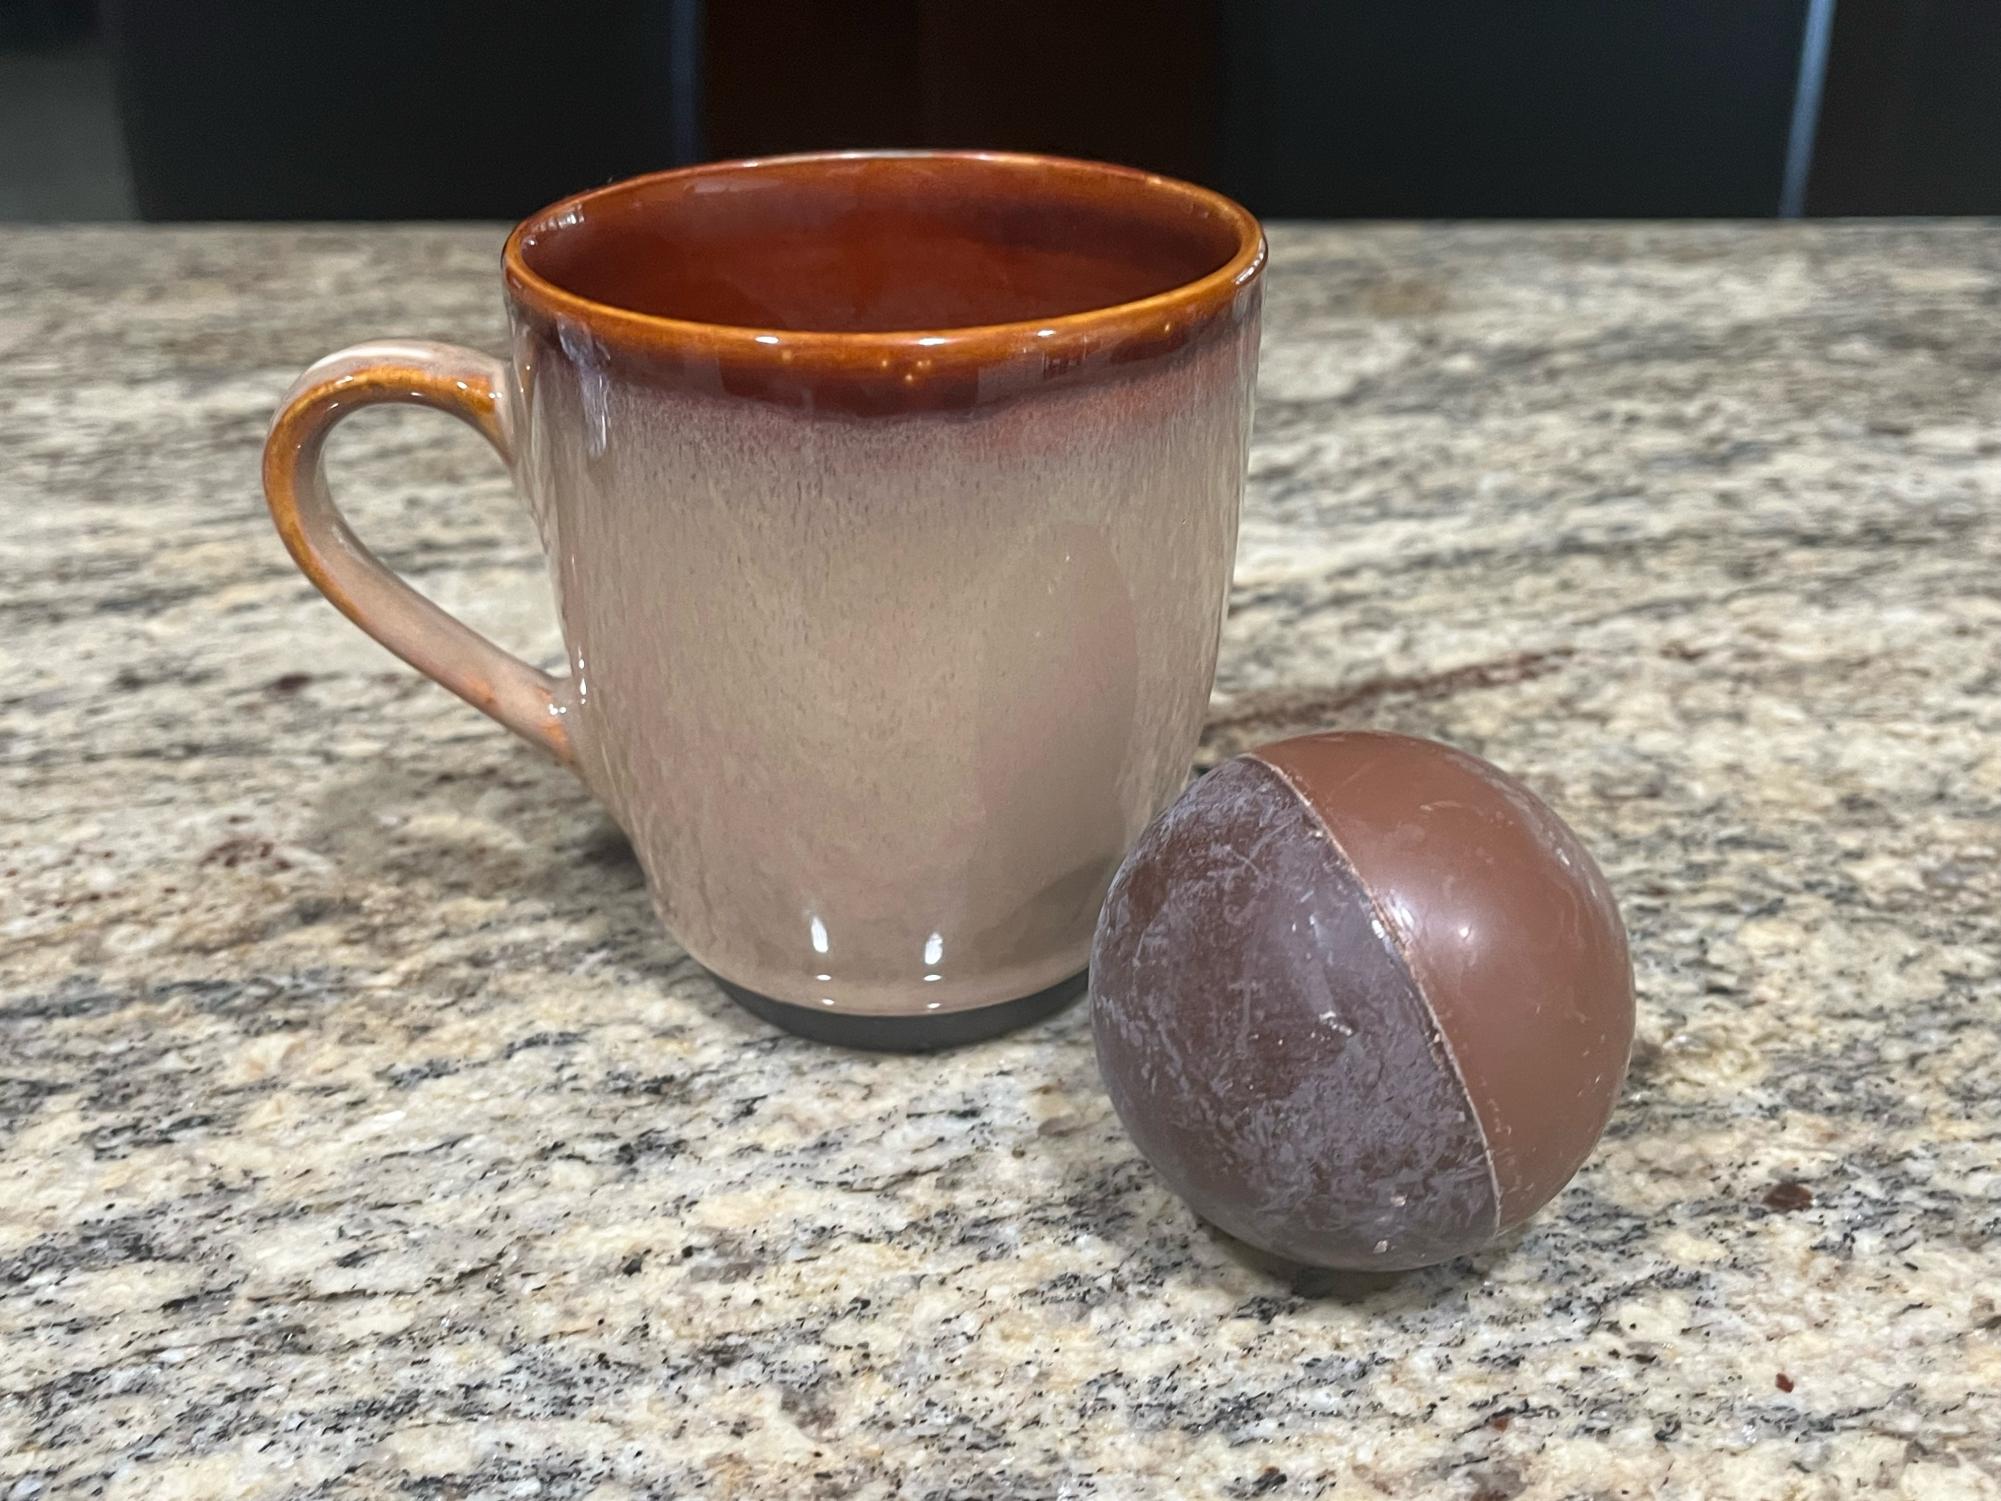 Homemade hot chocolate bombs offer a delicious way to celebrate the holiday season. When placed in warm milk, the bombs melt to create hot chocolate.